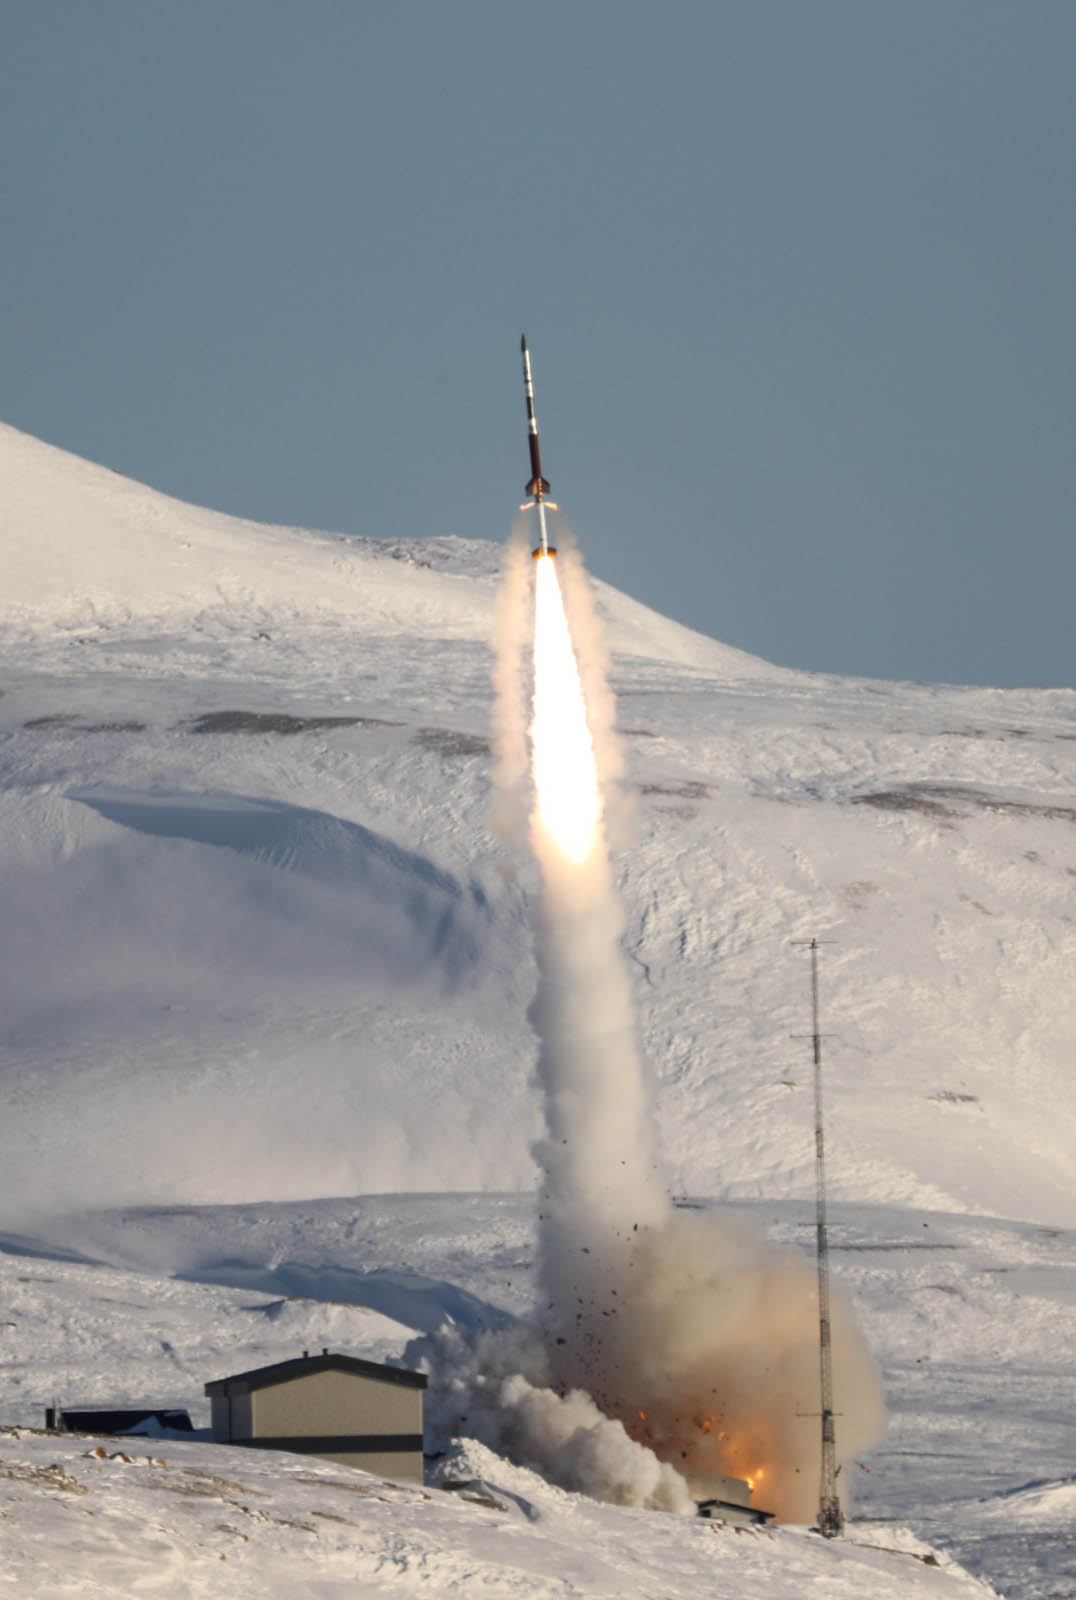 Endurance launches from Svalbard, Norway.